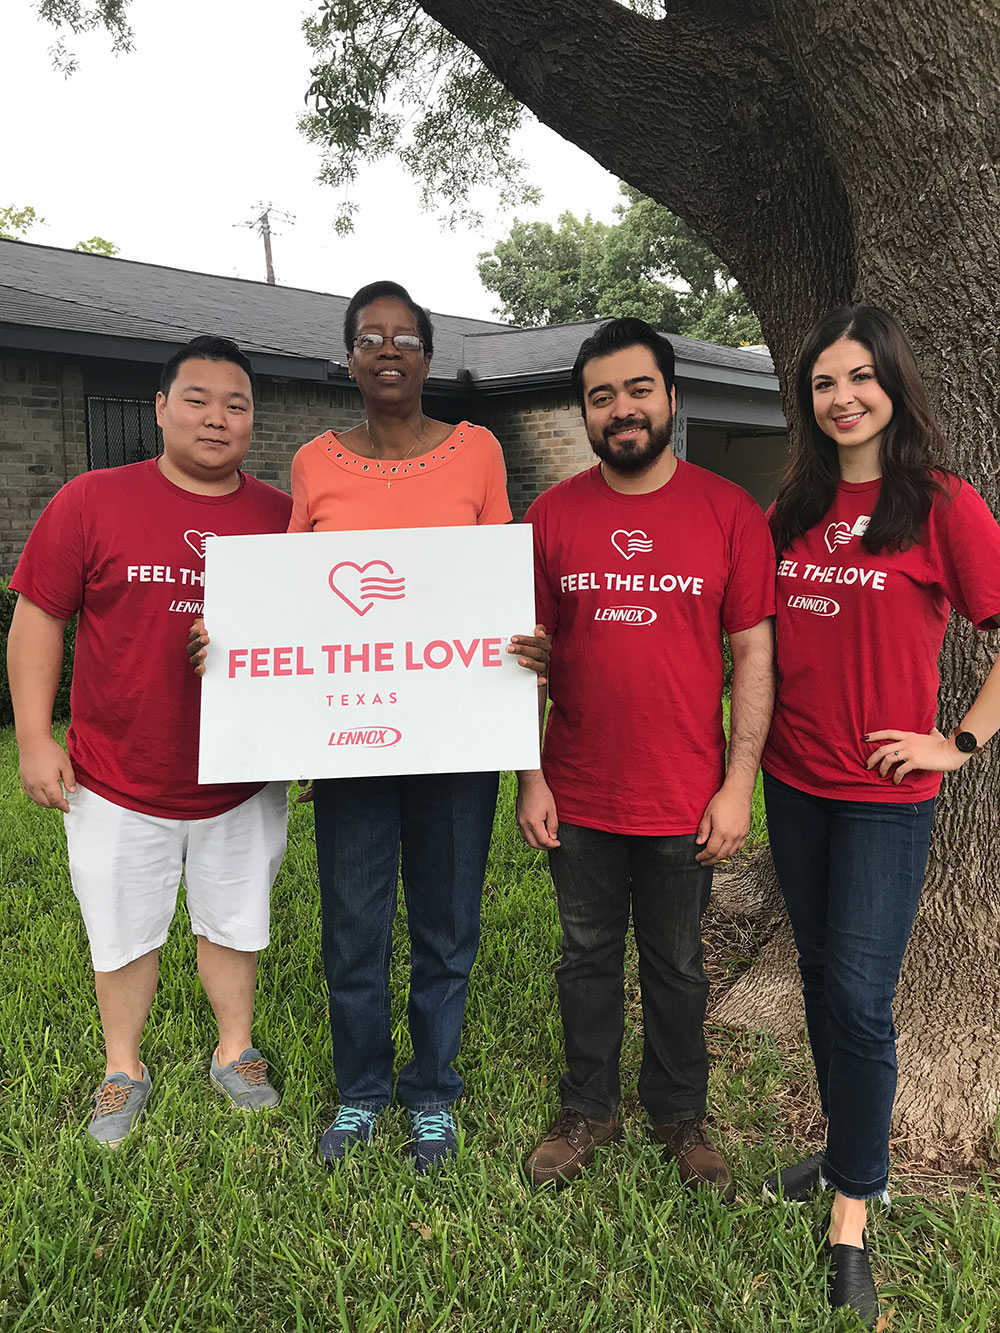 Four people holding a "Feel the Love" sign